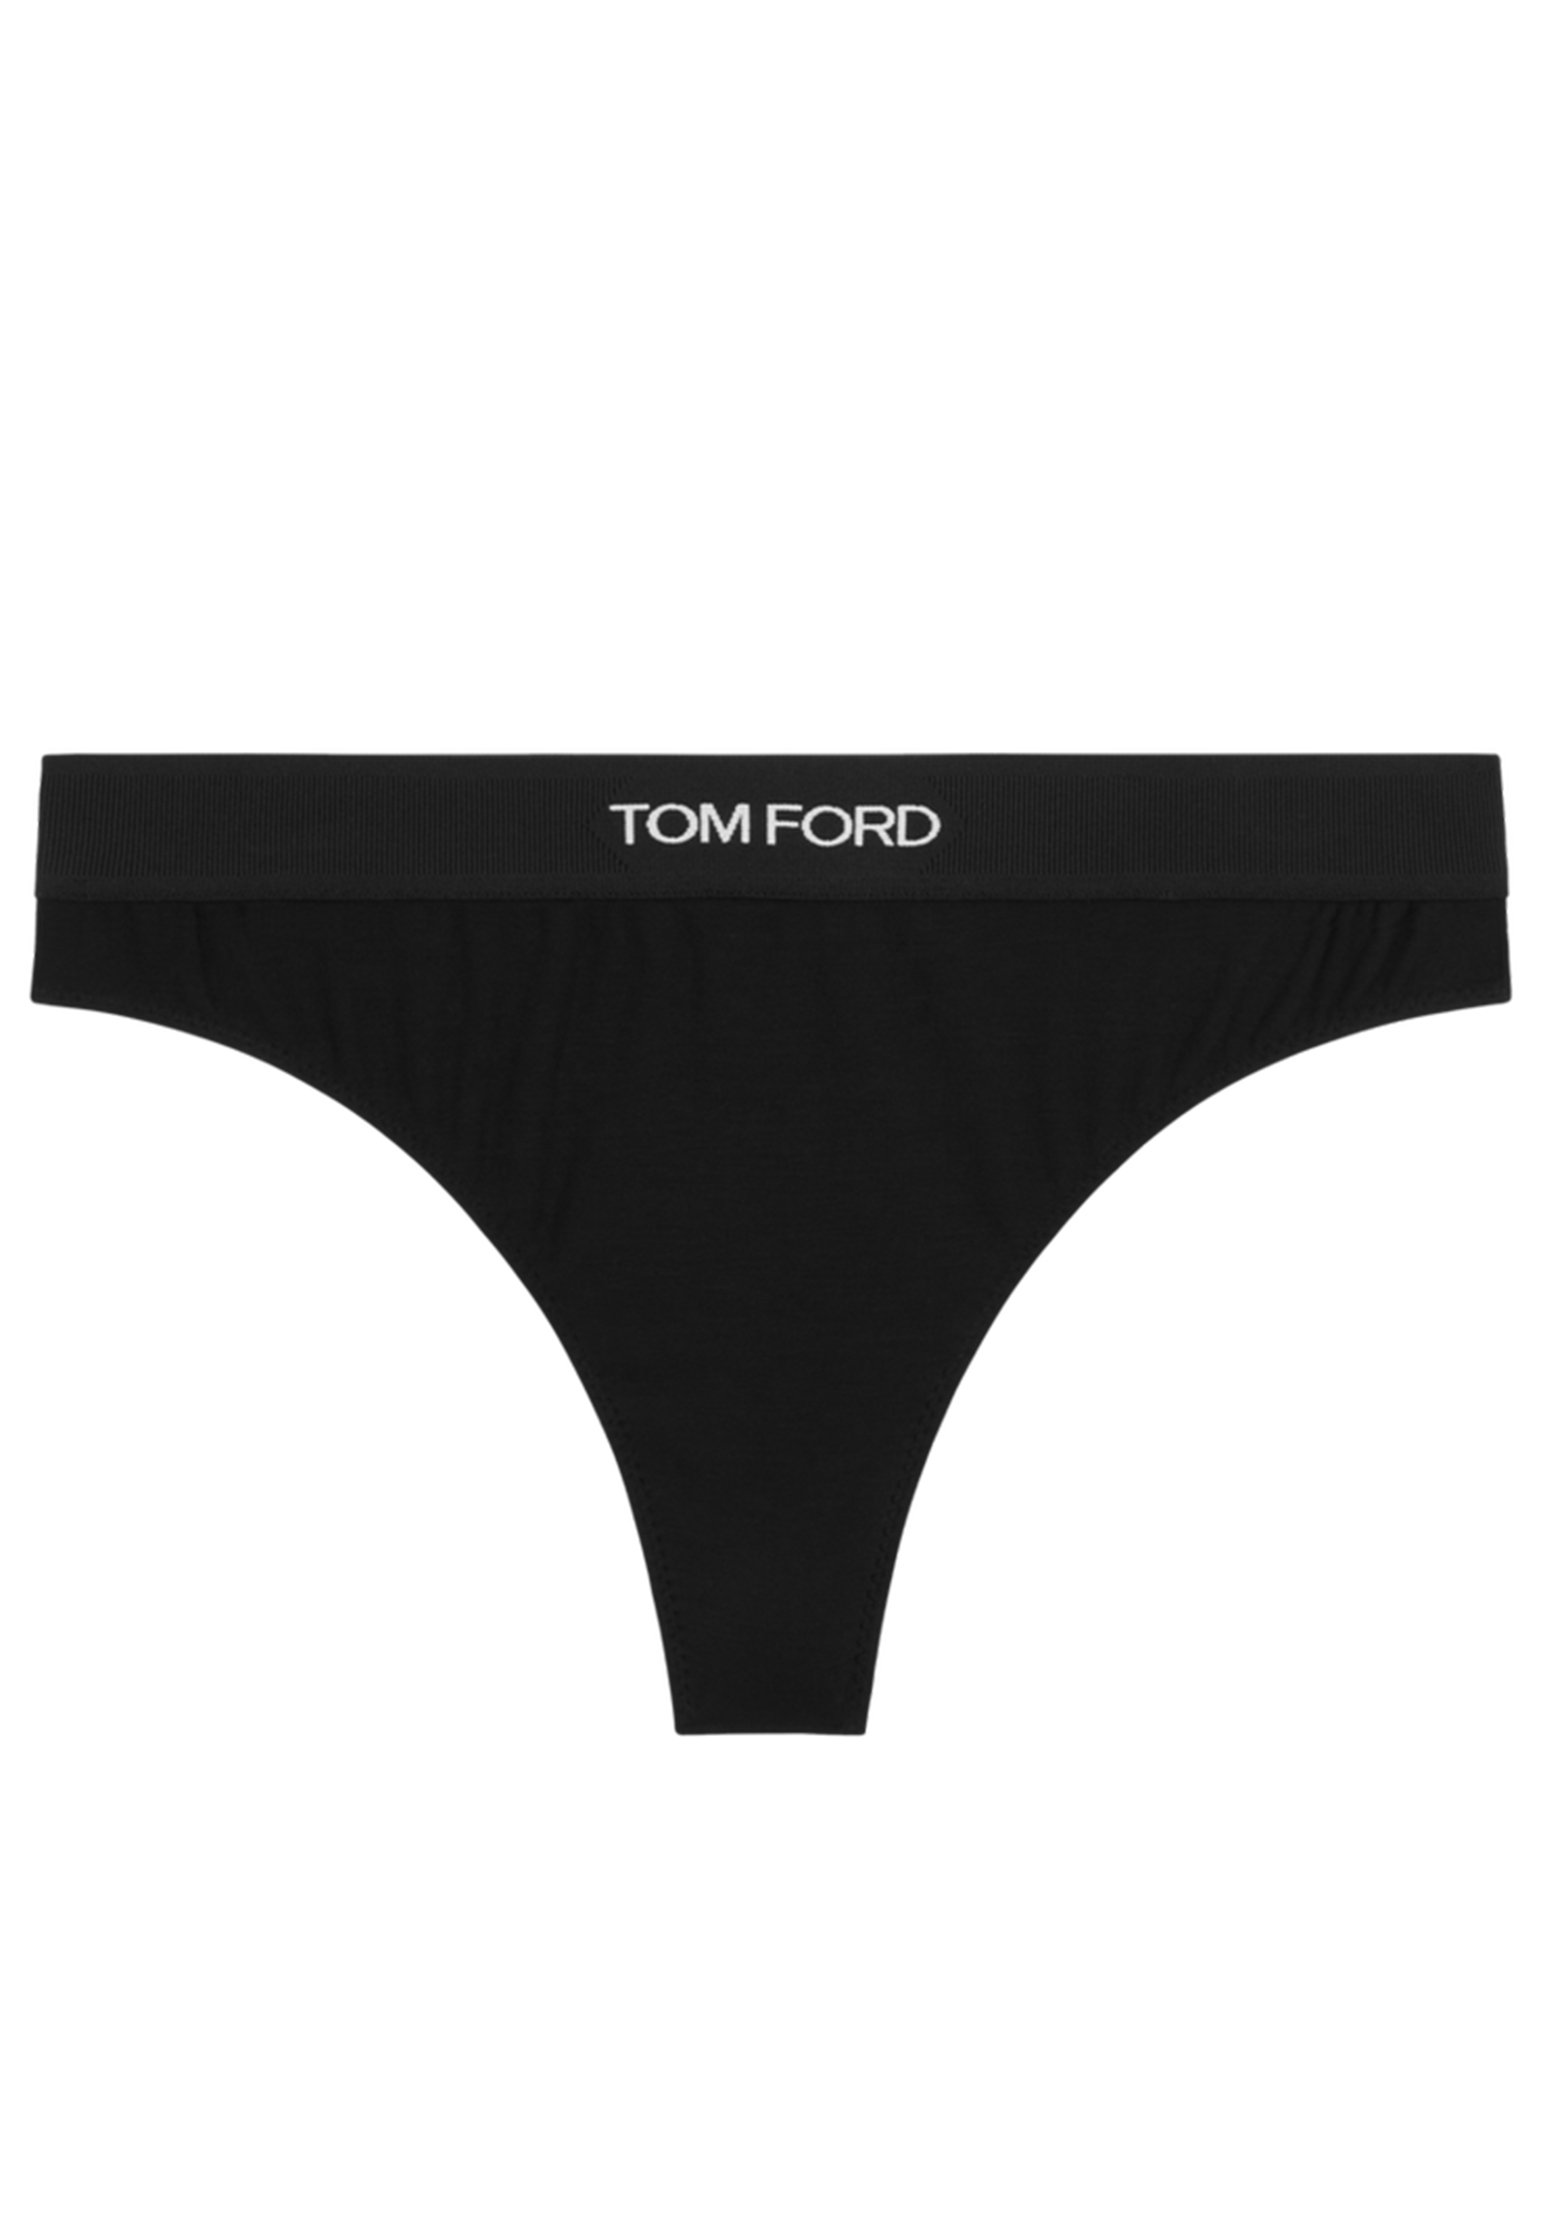 Thong TOM FORD Color: black (Code: 3716) in online store Allure